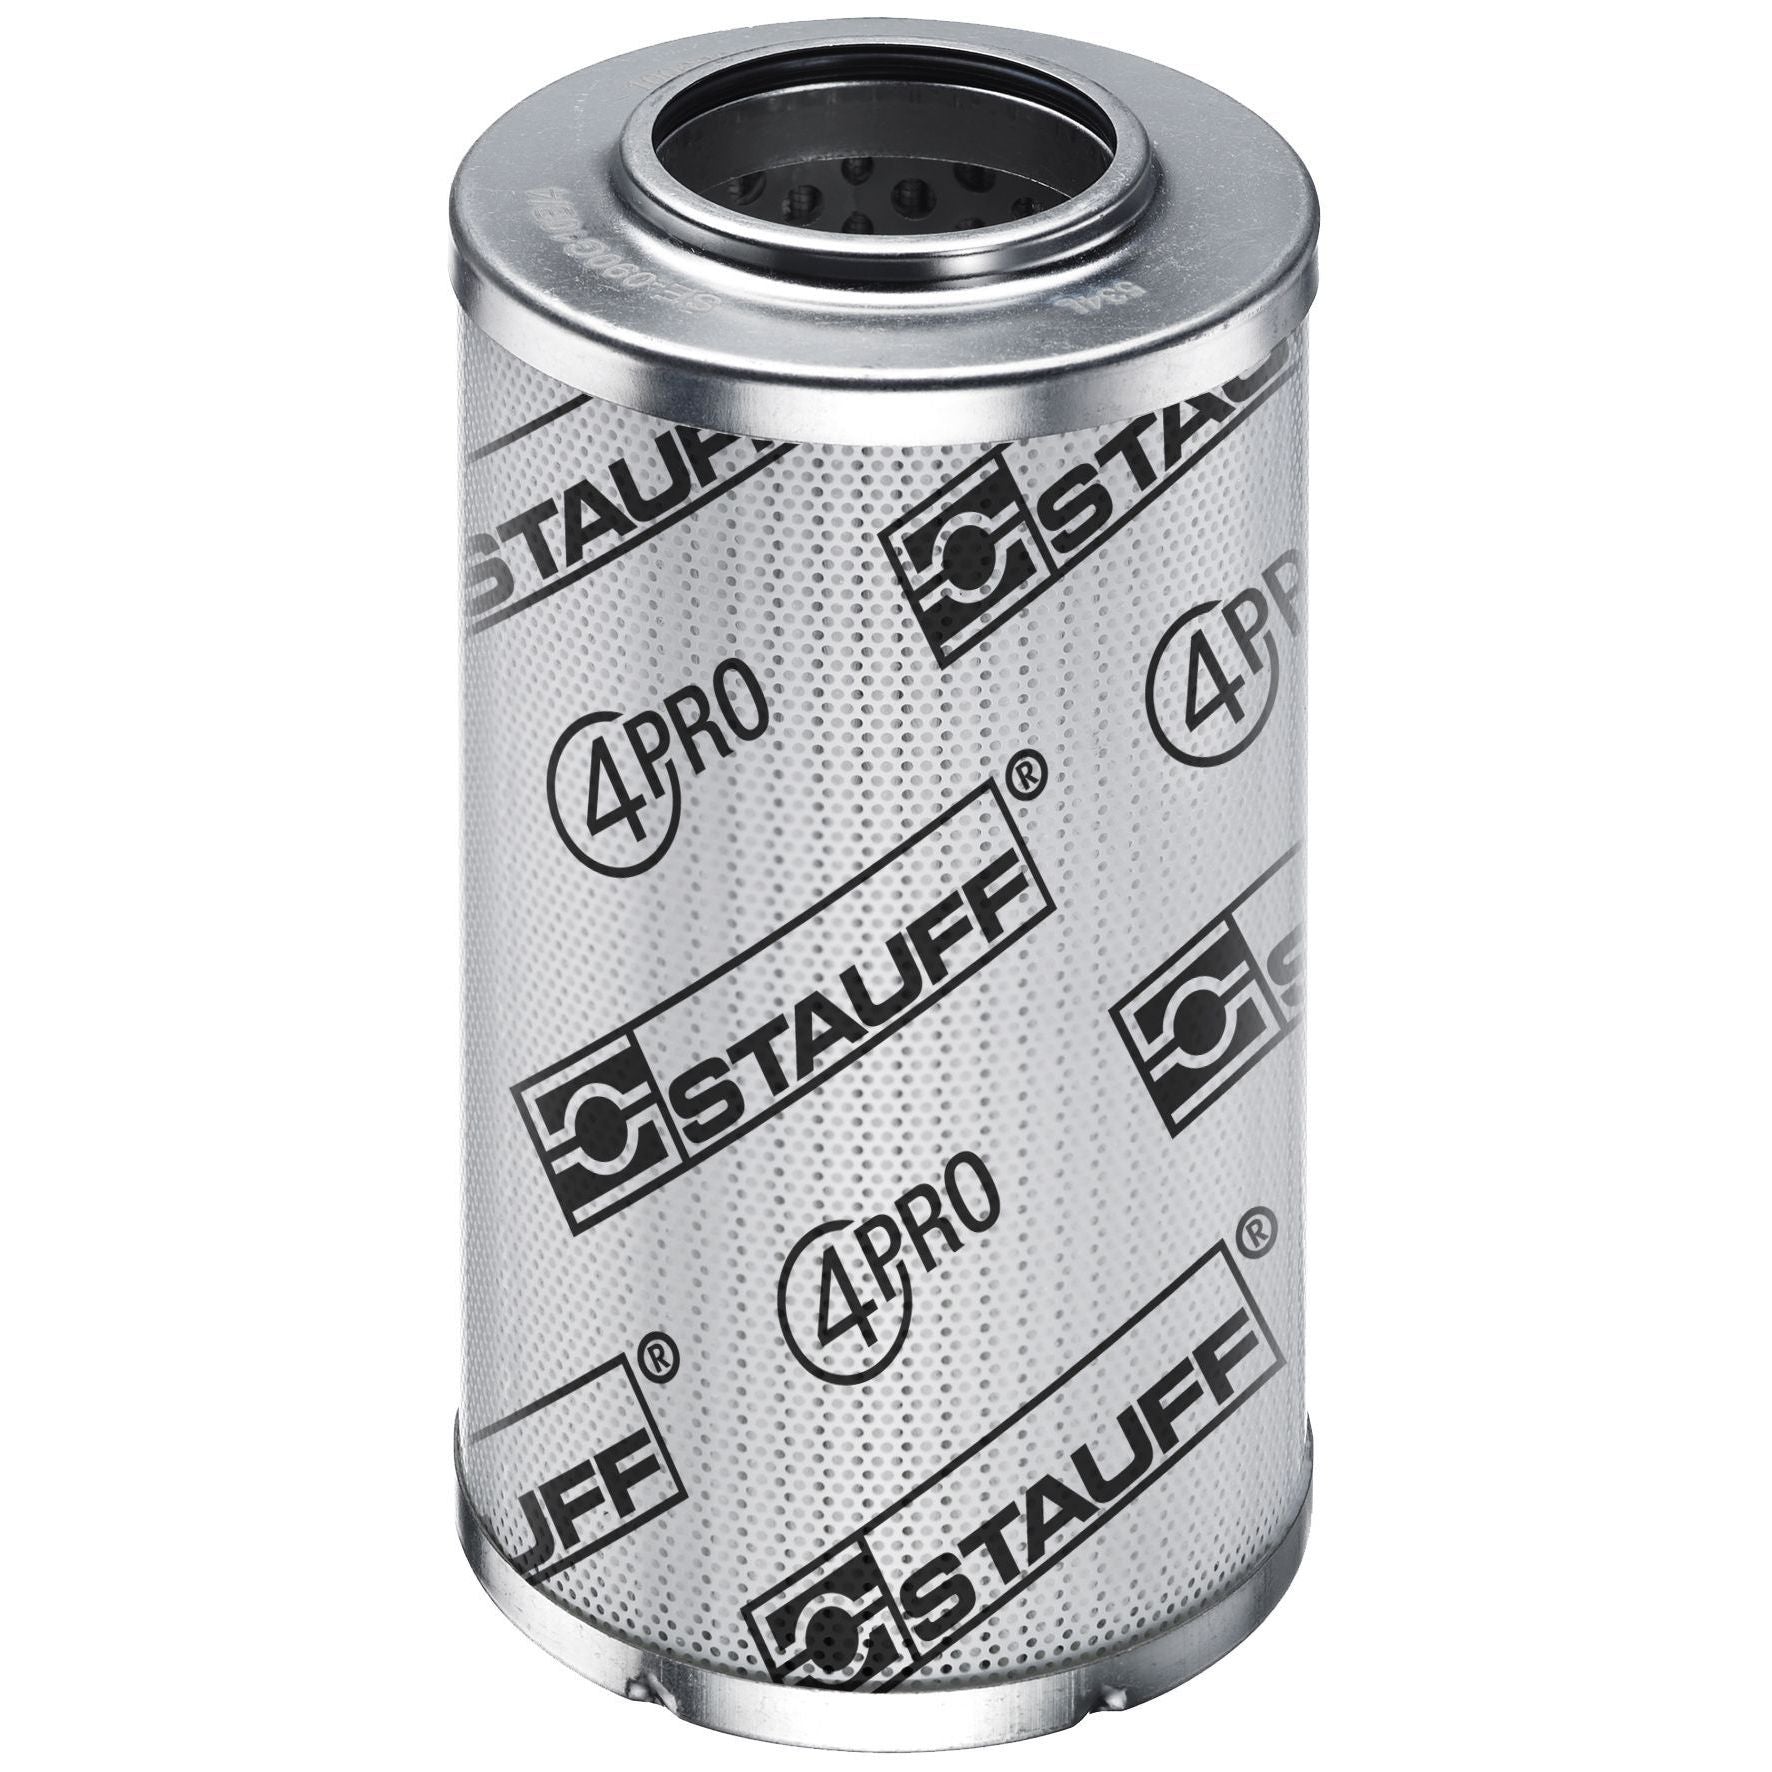 SE-160-G-10-B/4-1 : Stauff SF-160 Series Filter Element, 10 Micron, Synthetic, 363psi Collapse Differential, Buna